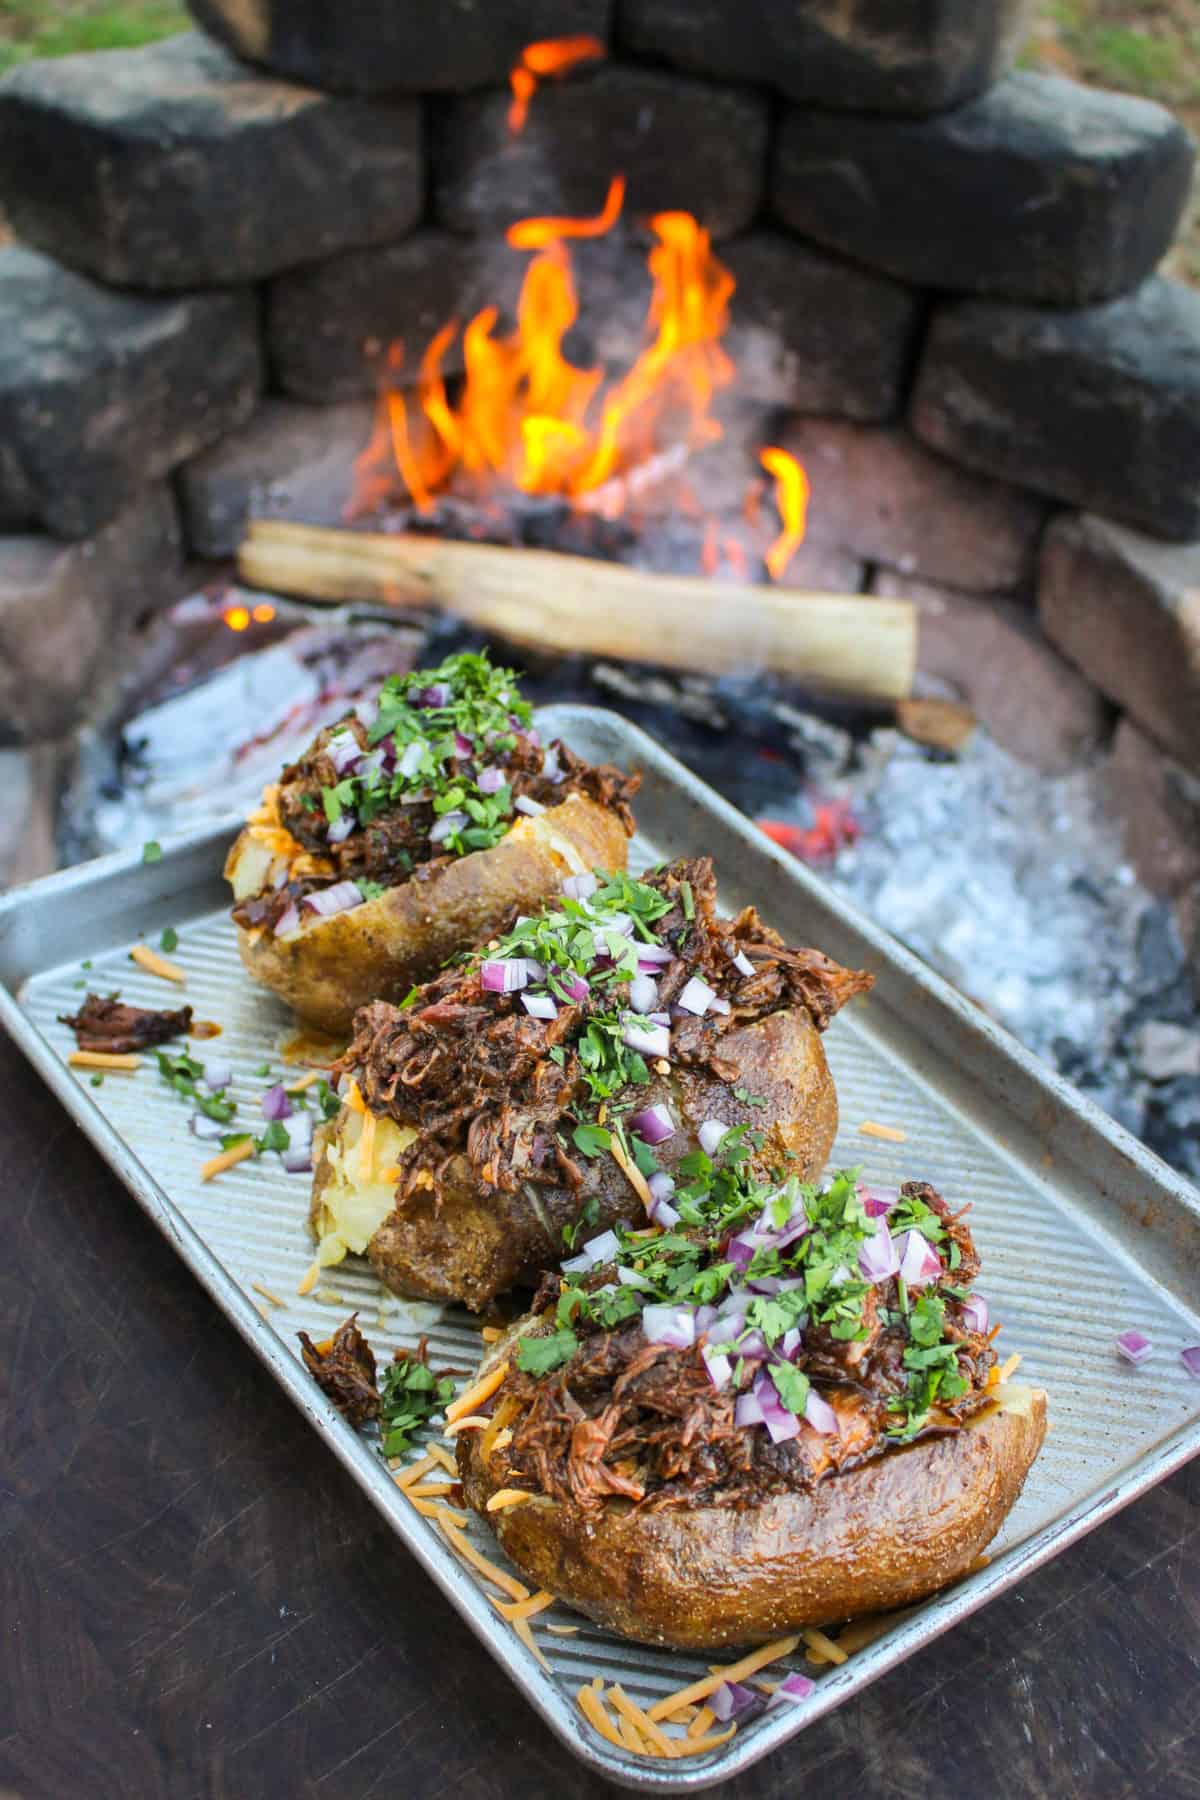 Birria Baked Potato assembled and sitting in front of the fire.